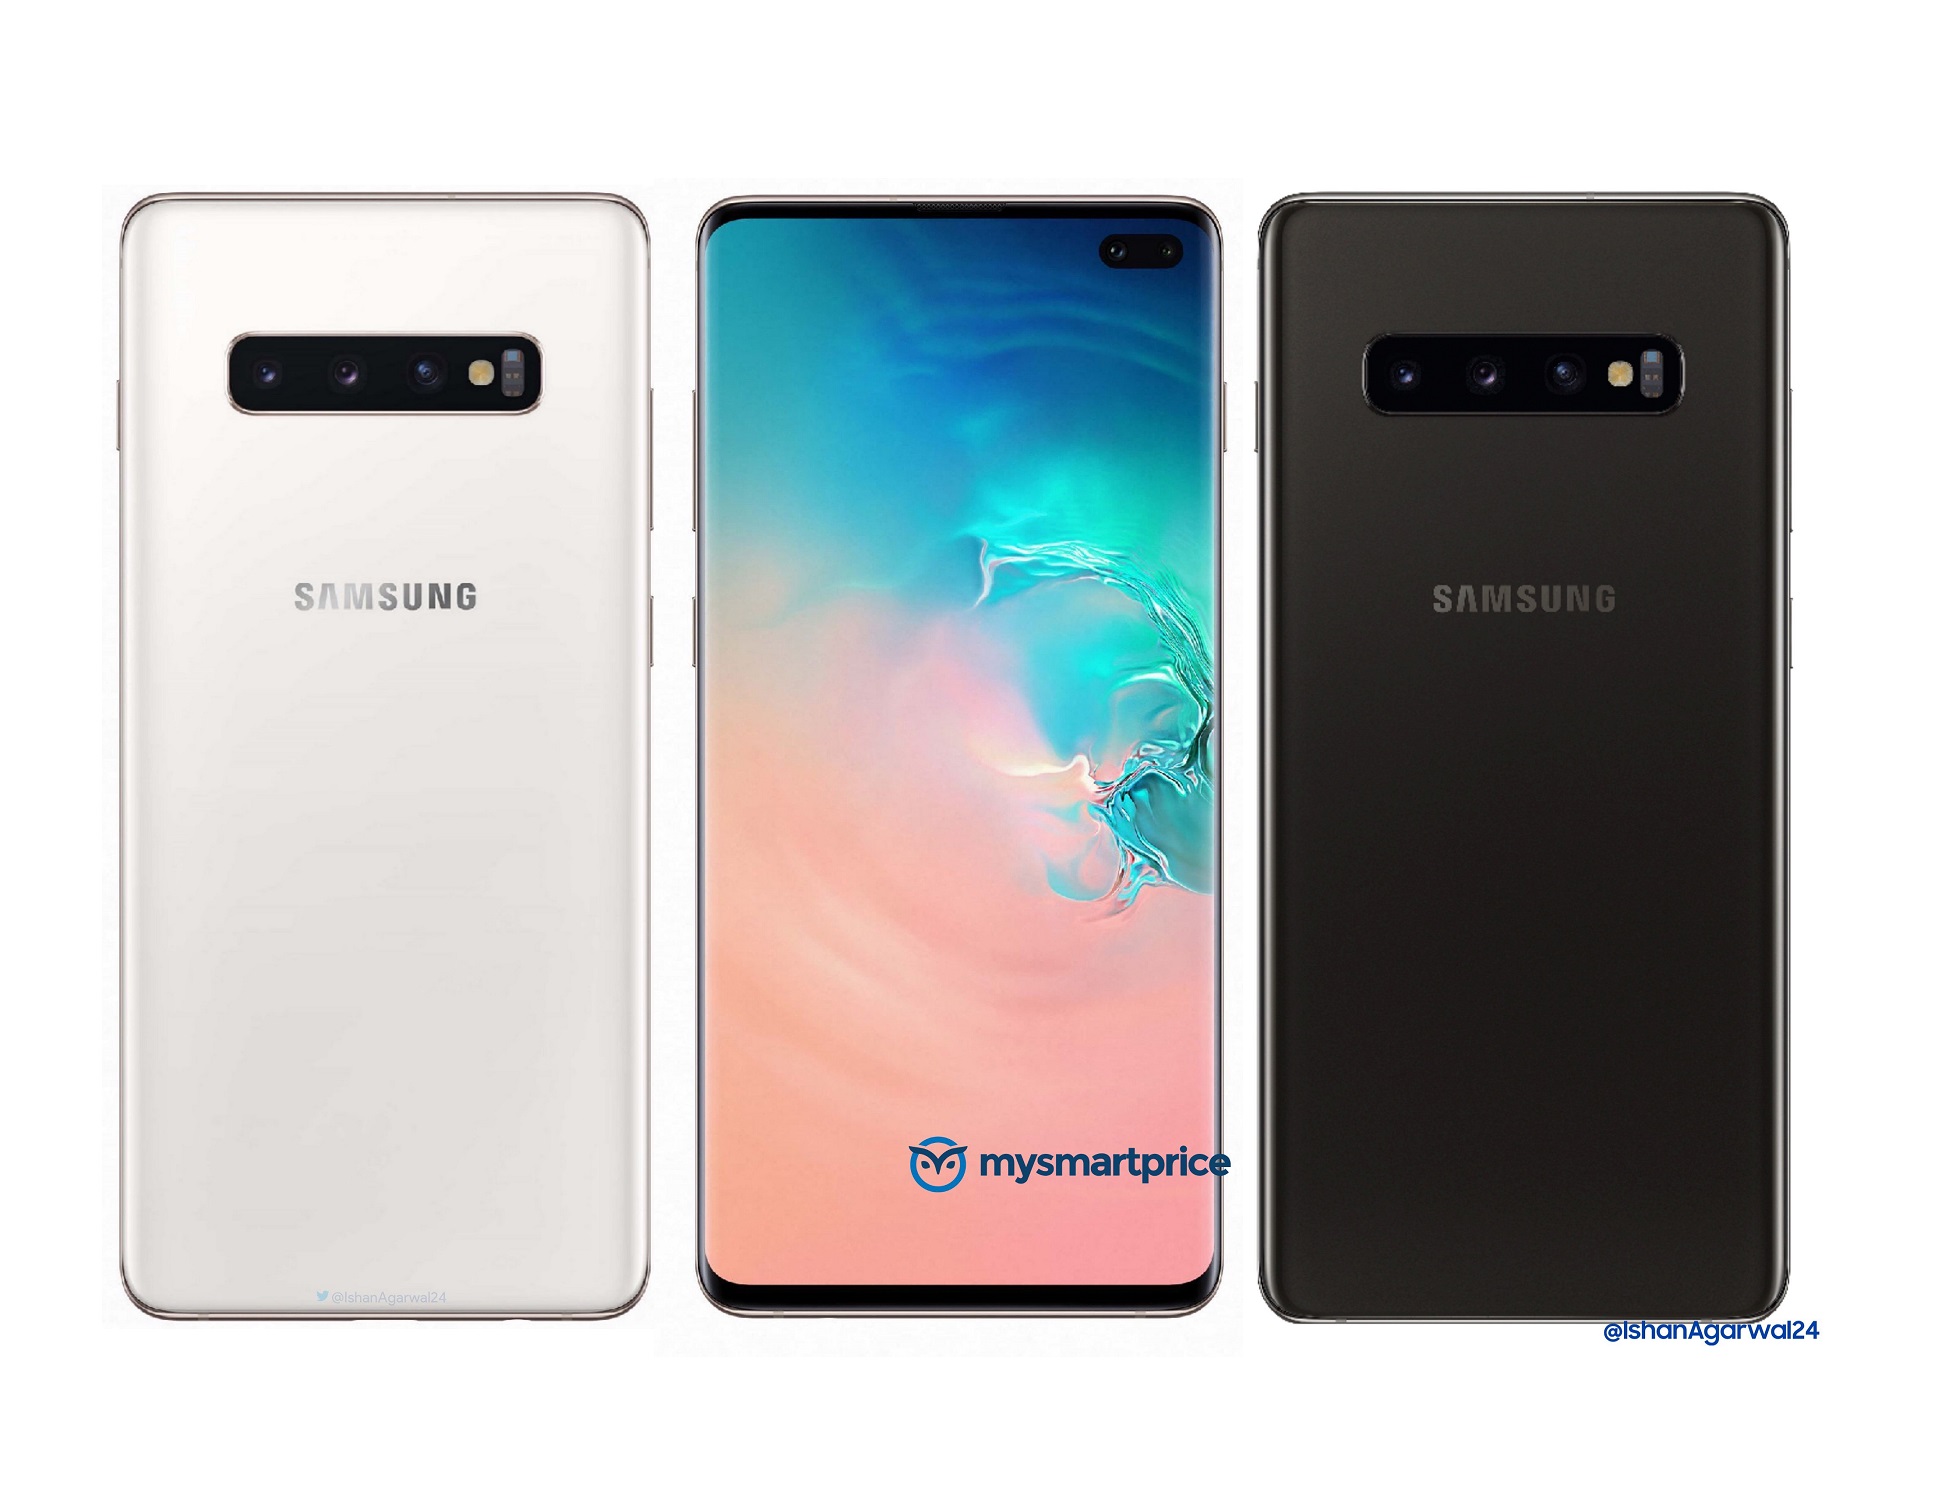 Samsung note s10. Samsung Galaxy s10 Note. Samsung s10 Note Plus. Samsung Note s10e. Самсунг s10 Plus 512gb.